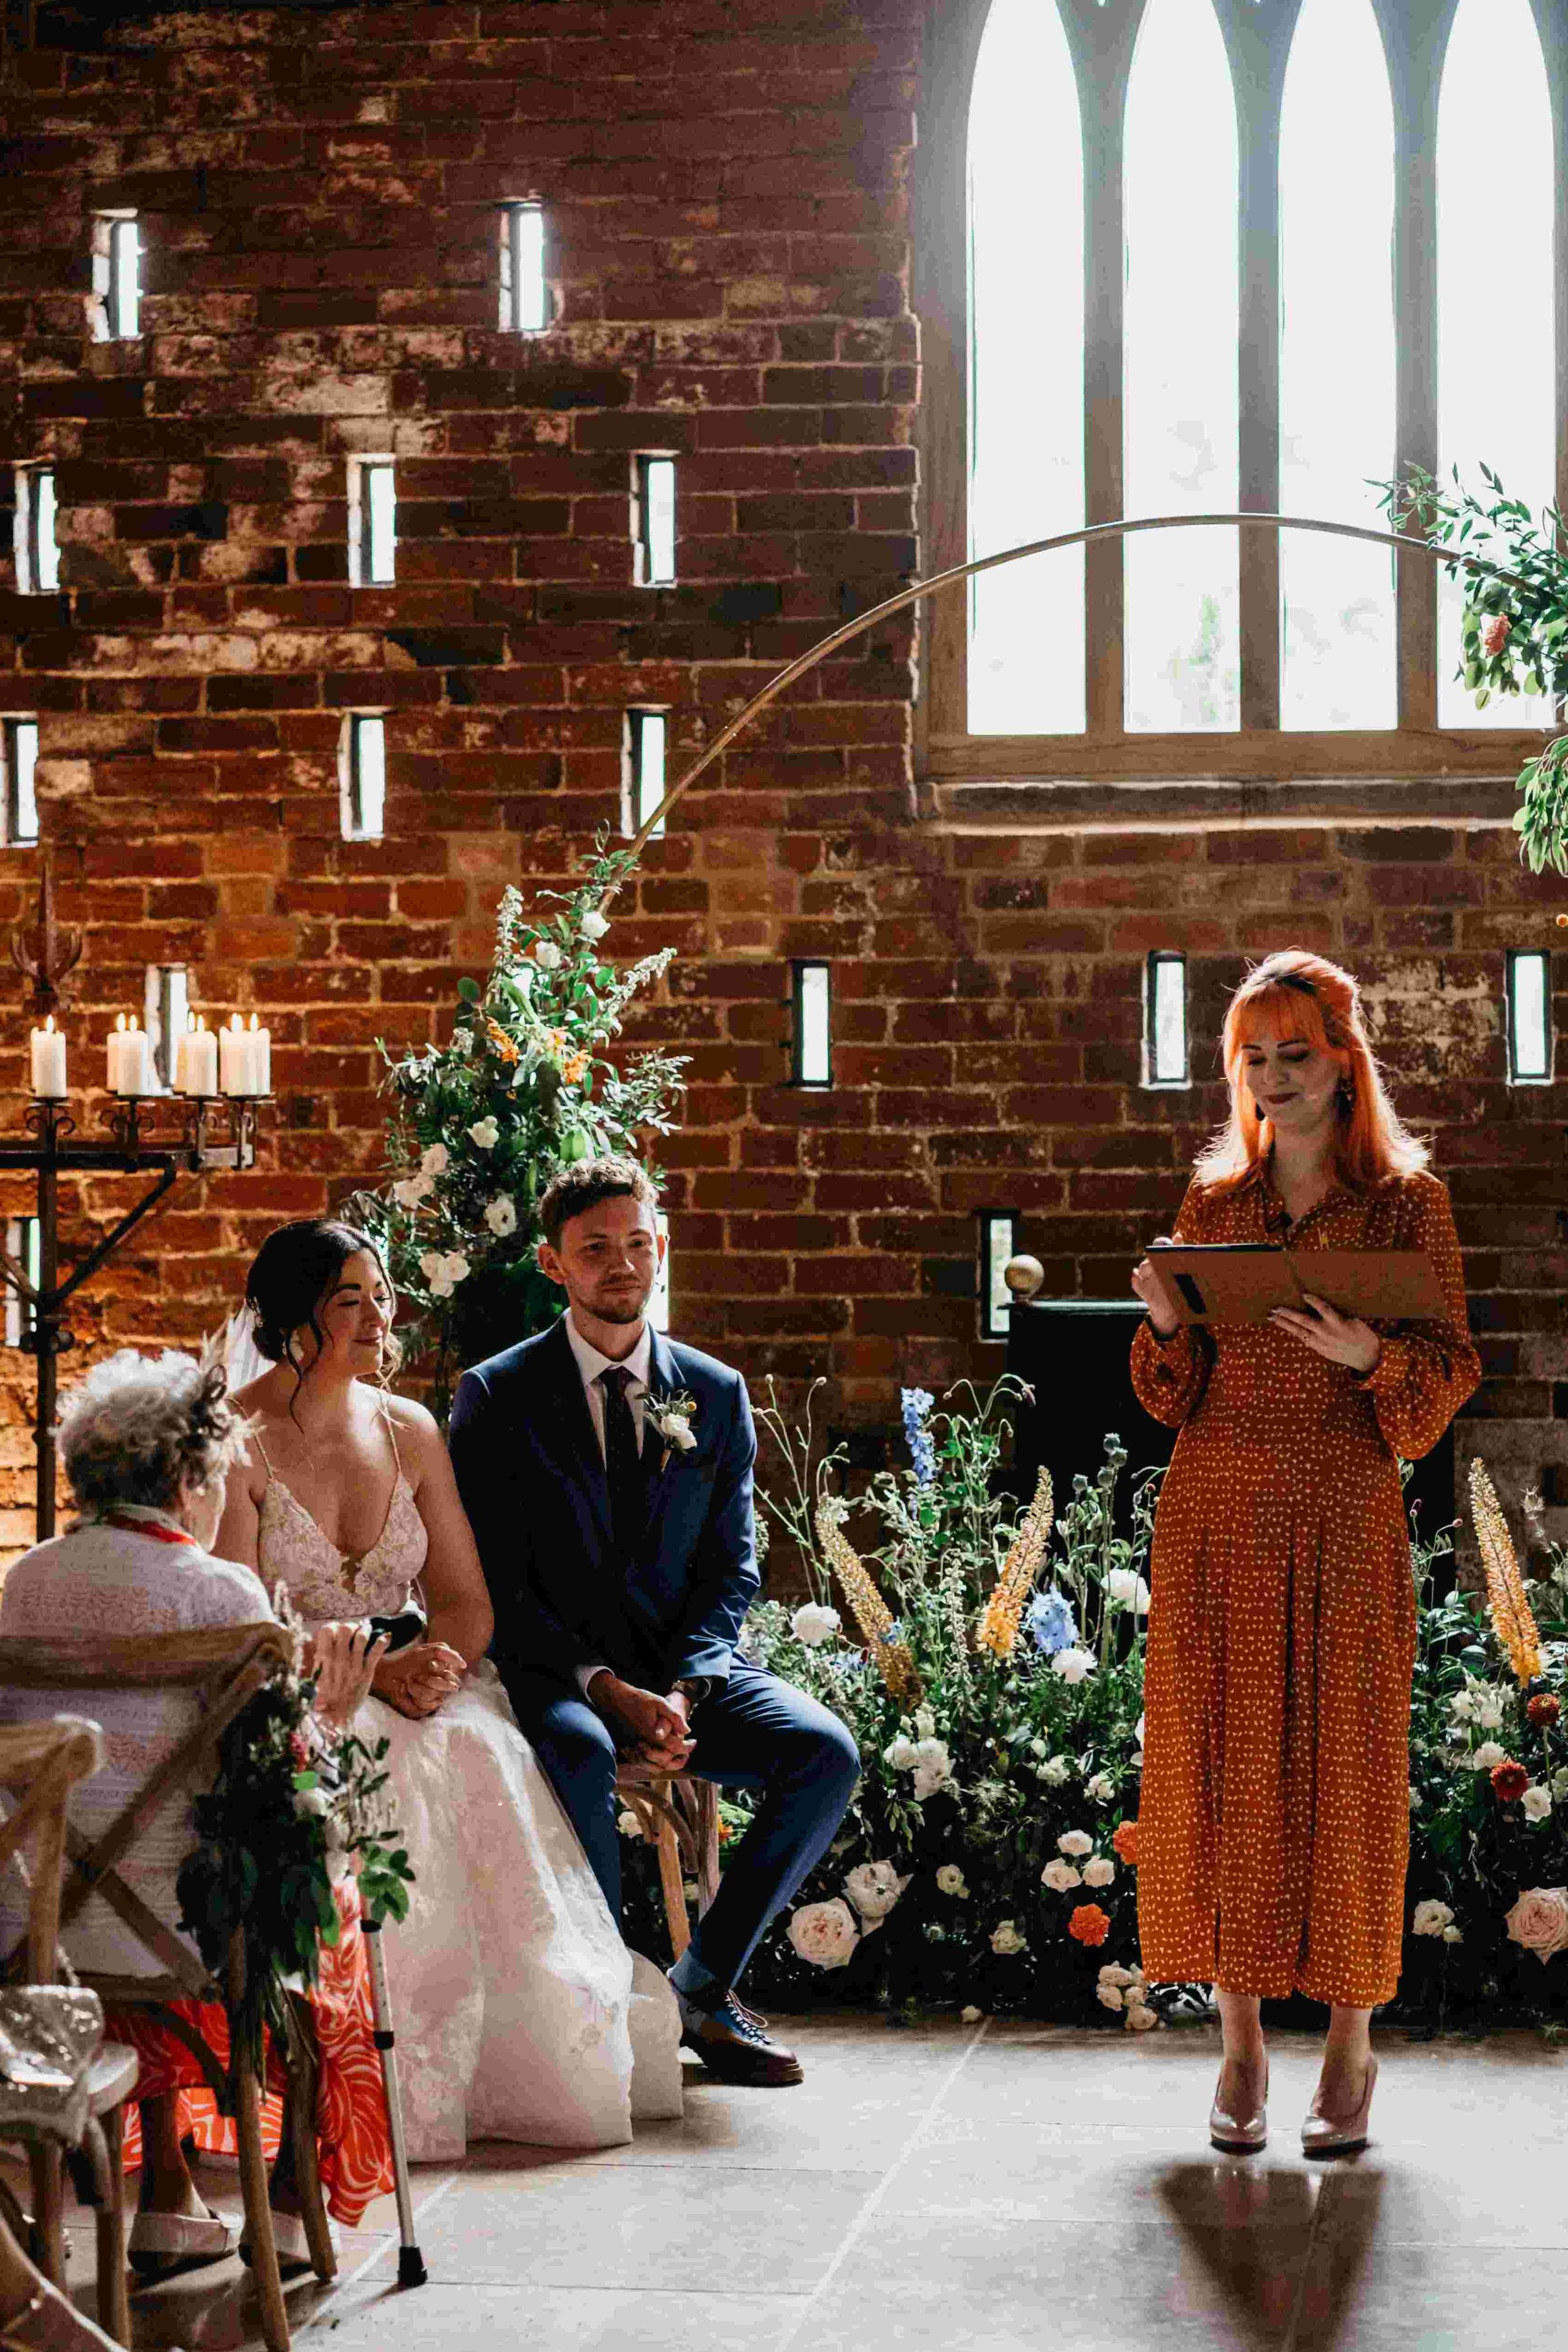  Photo by: David Boynton Photography  The modern celebrant is stood in a beautiful room with exposed brick walls and grand arched stone windows as well as lots of brick sized, small rectangle windows allowing lots of light to flood in.   There is a l